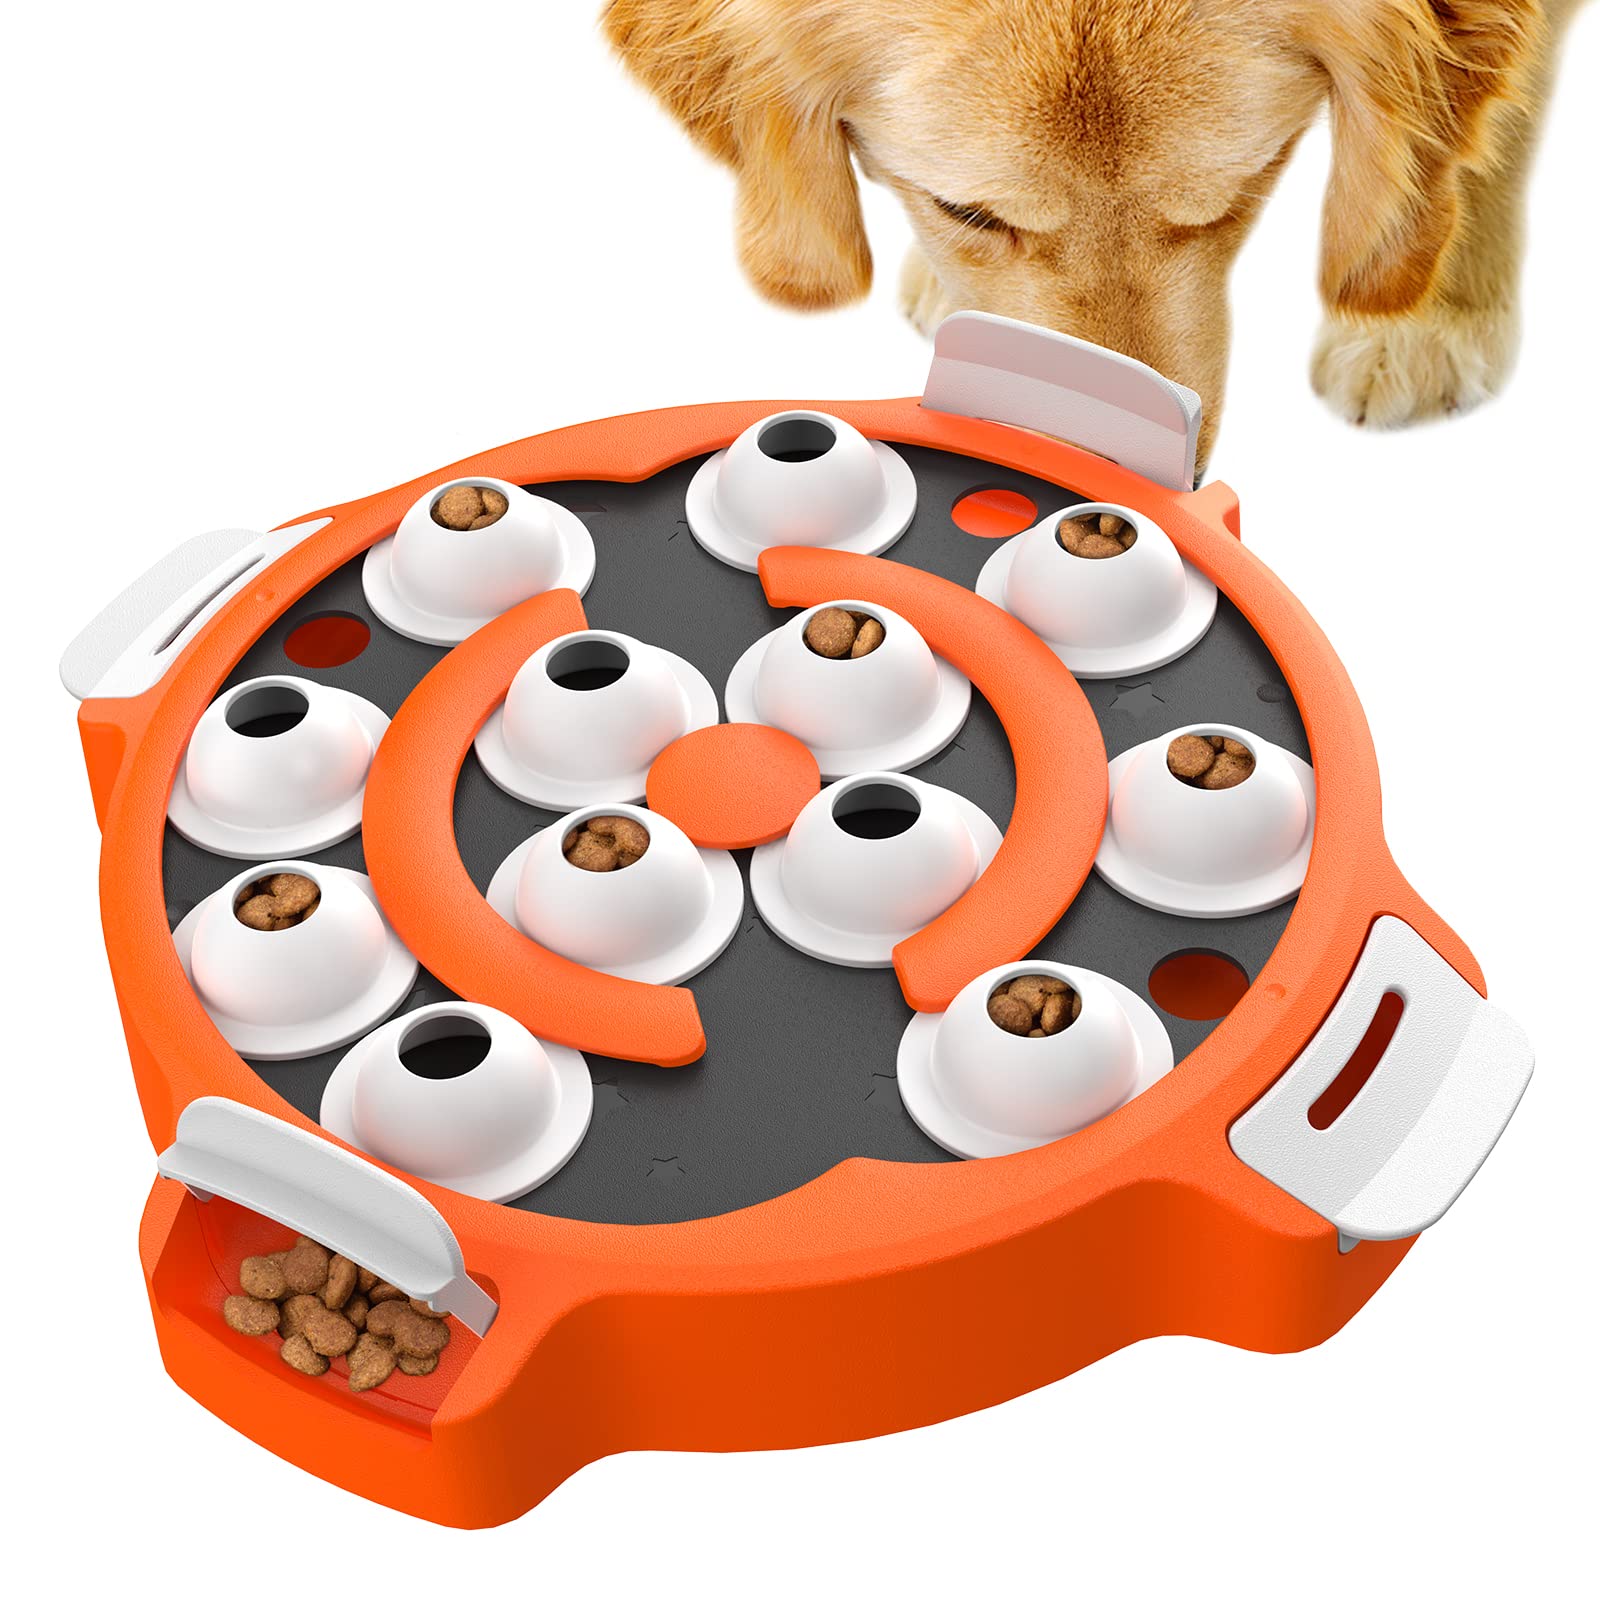 KADTC Dog Puzzle Toy Dogs Brain Stimulation Mentally Stimulating Toys Beginner Puppy Treat Food Feeder Dispenser Advanced Level 2 Interactive Games for Small/Medium/Large Aggressive Chewers Breed Gift